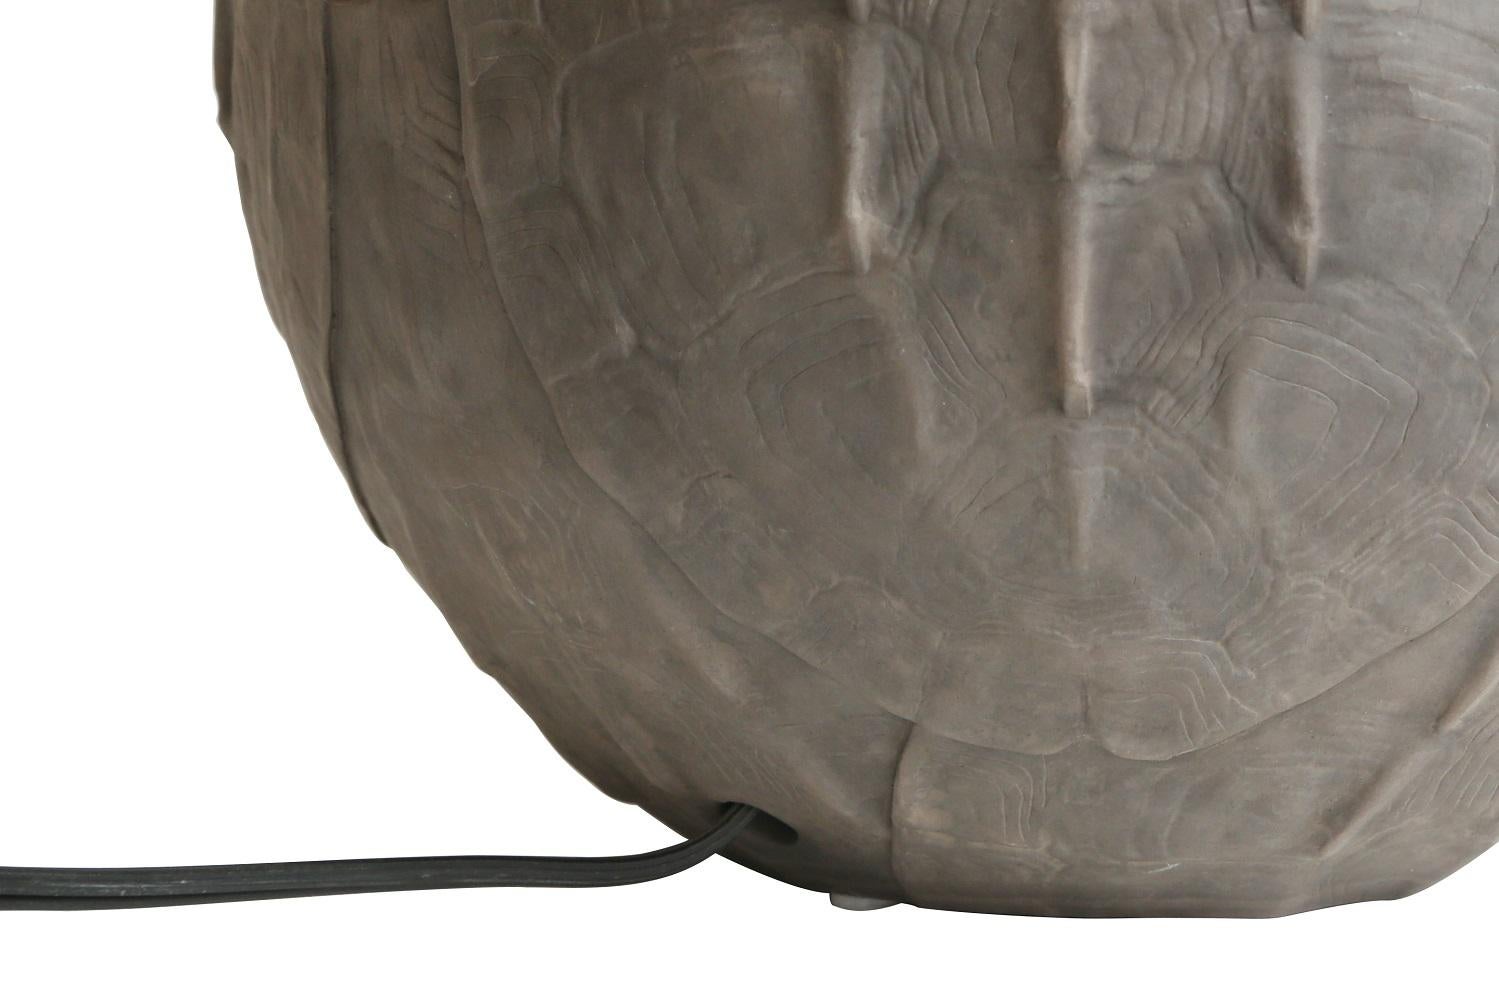 Modern Giles Caffier Turtle Molded Ceramic Round Table Lamp, Made in Paris